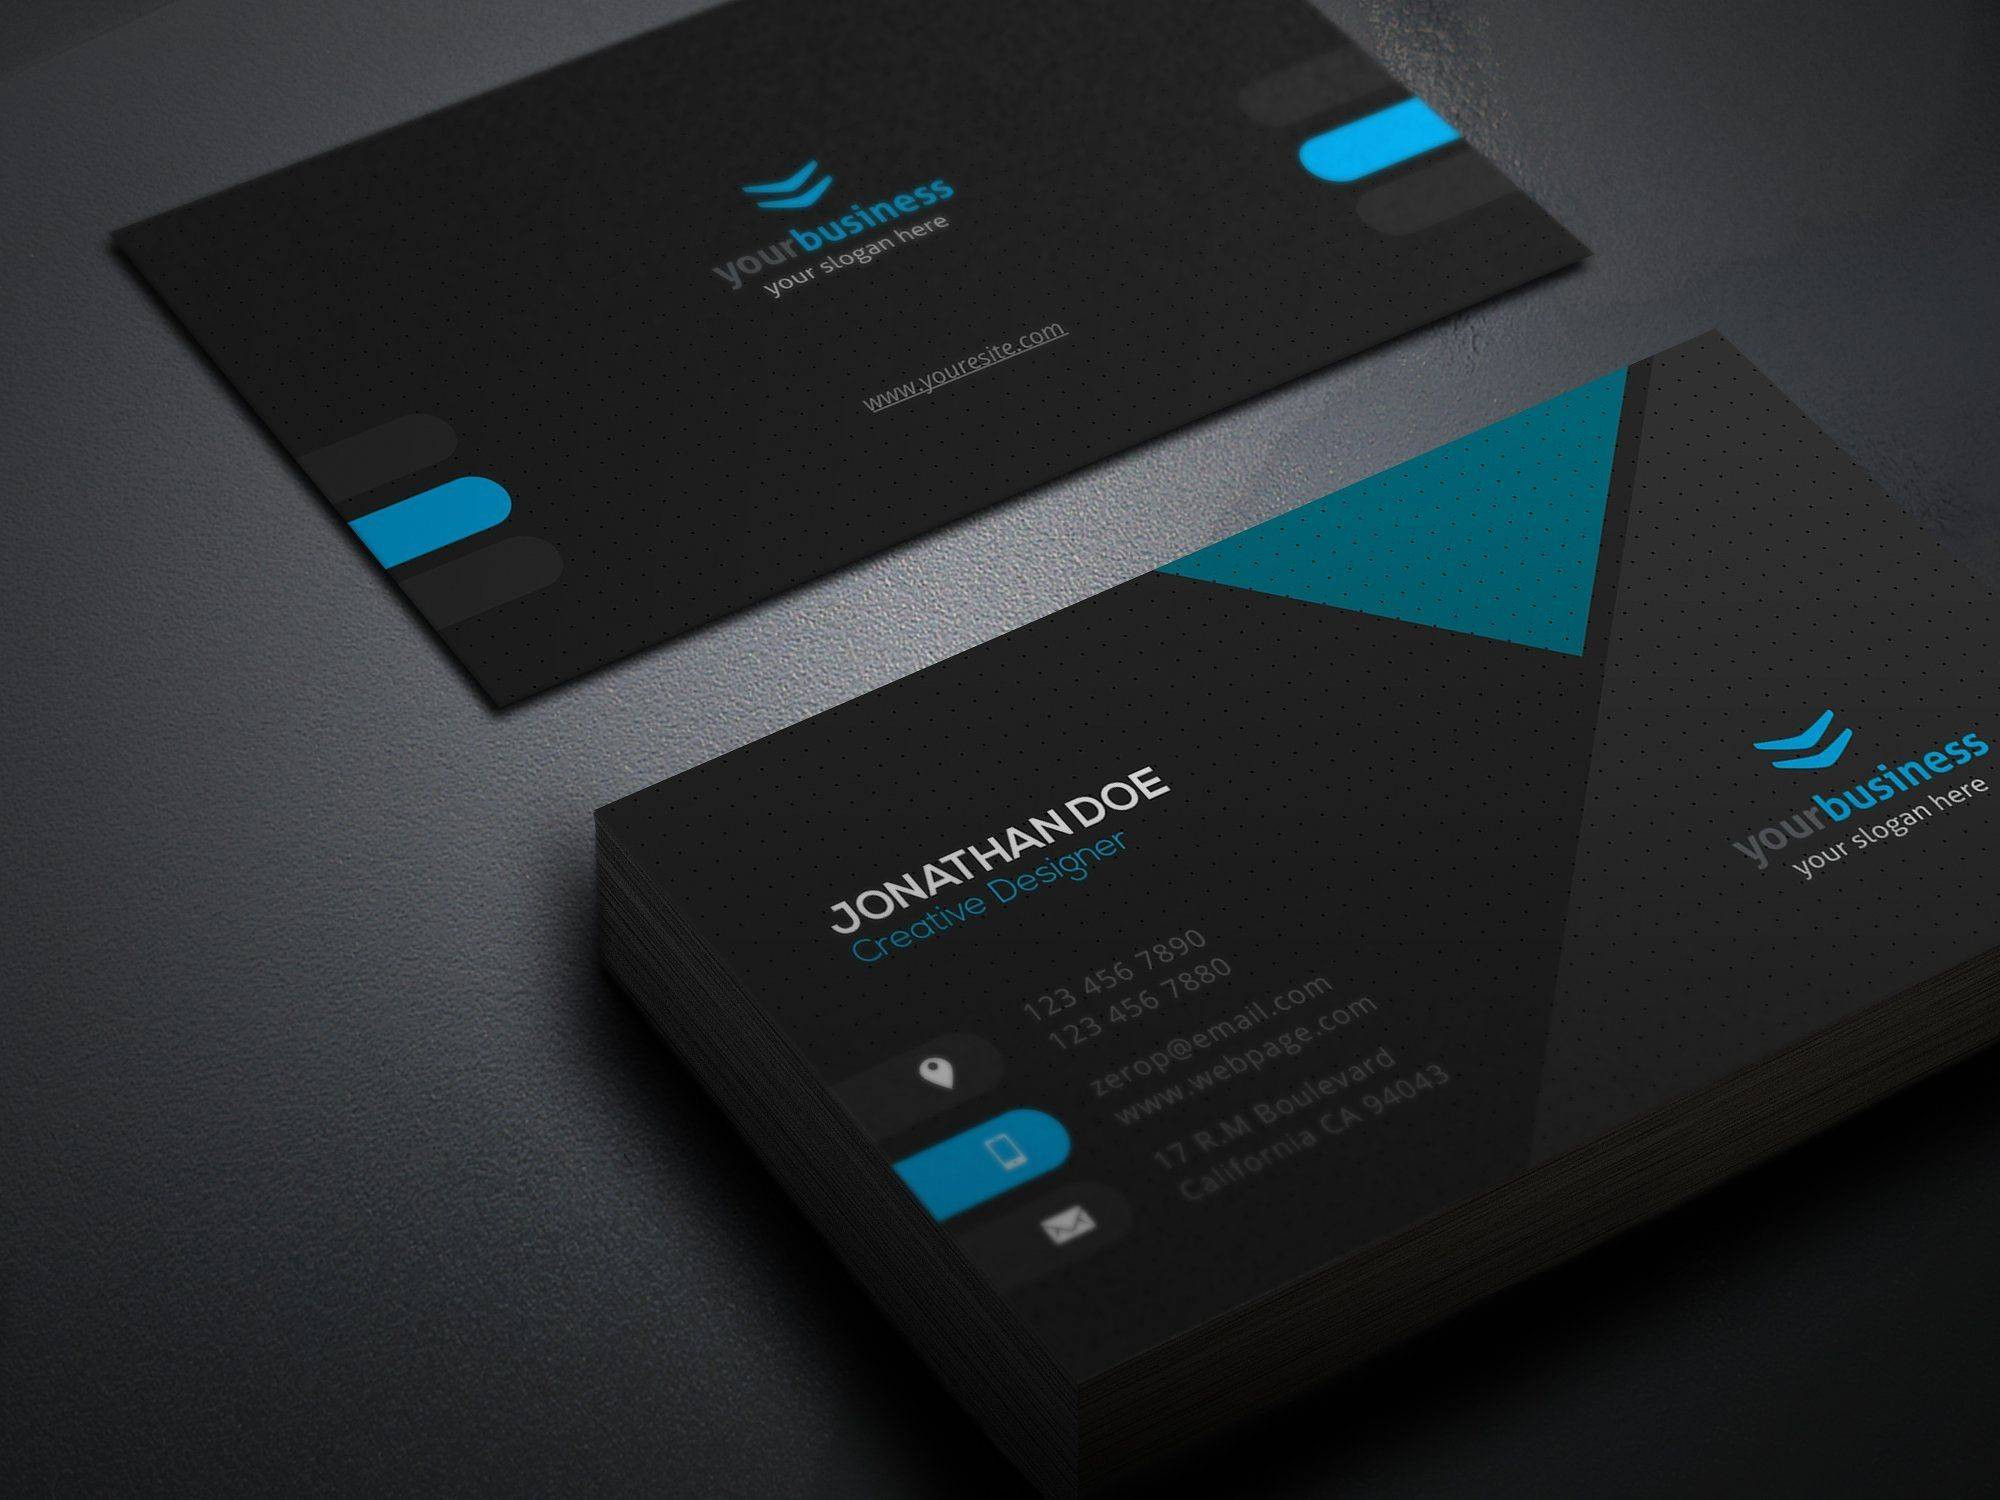 009 Design Business Card Template Fresh Free Cards Templates Of Business Card Template Photoshop Cs6